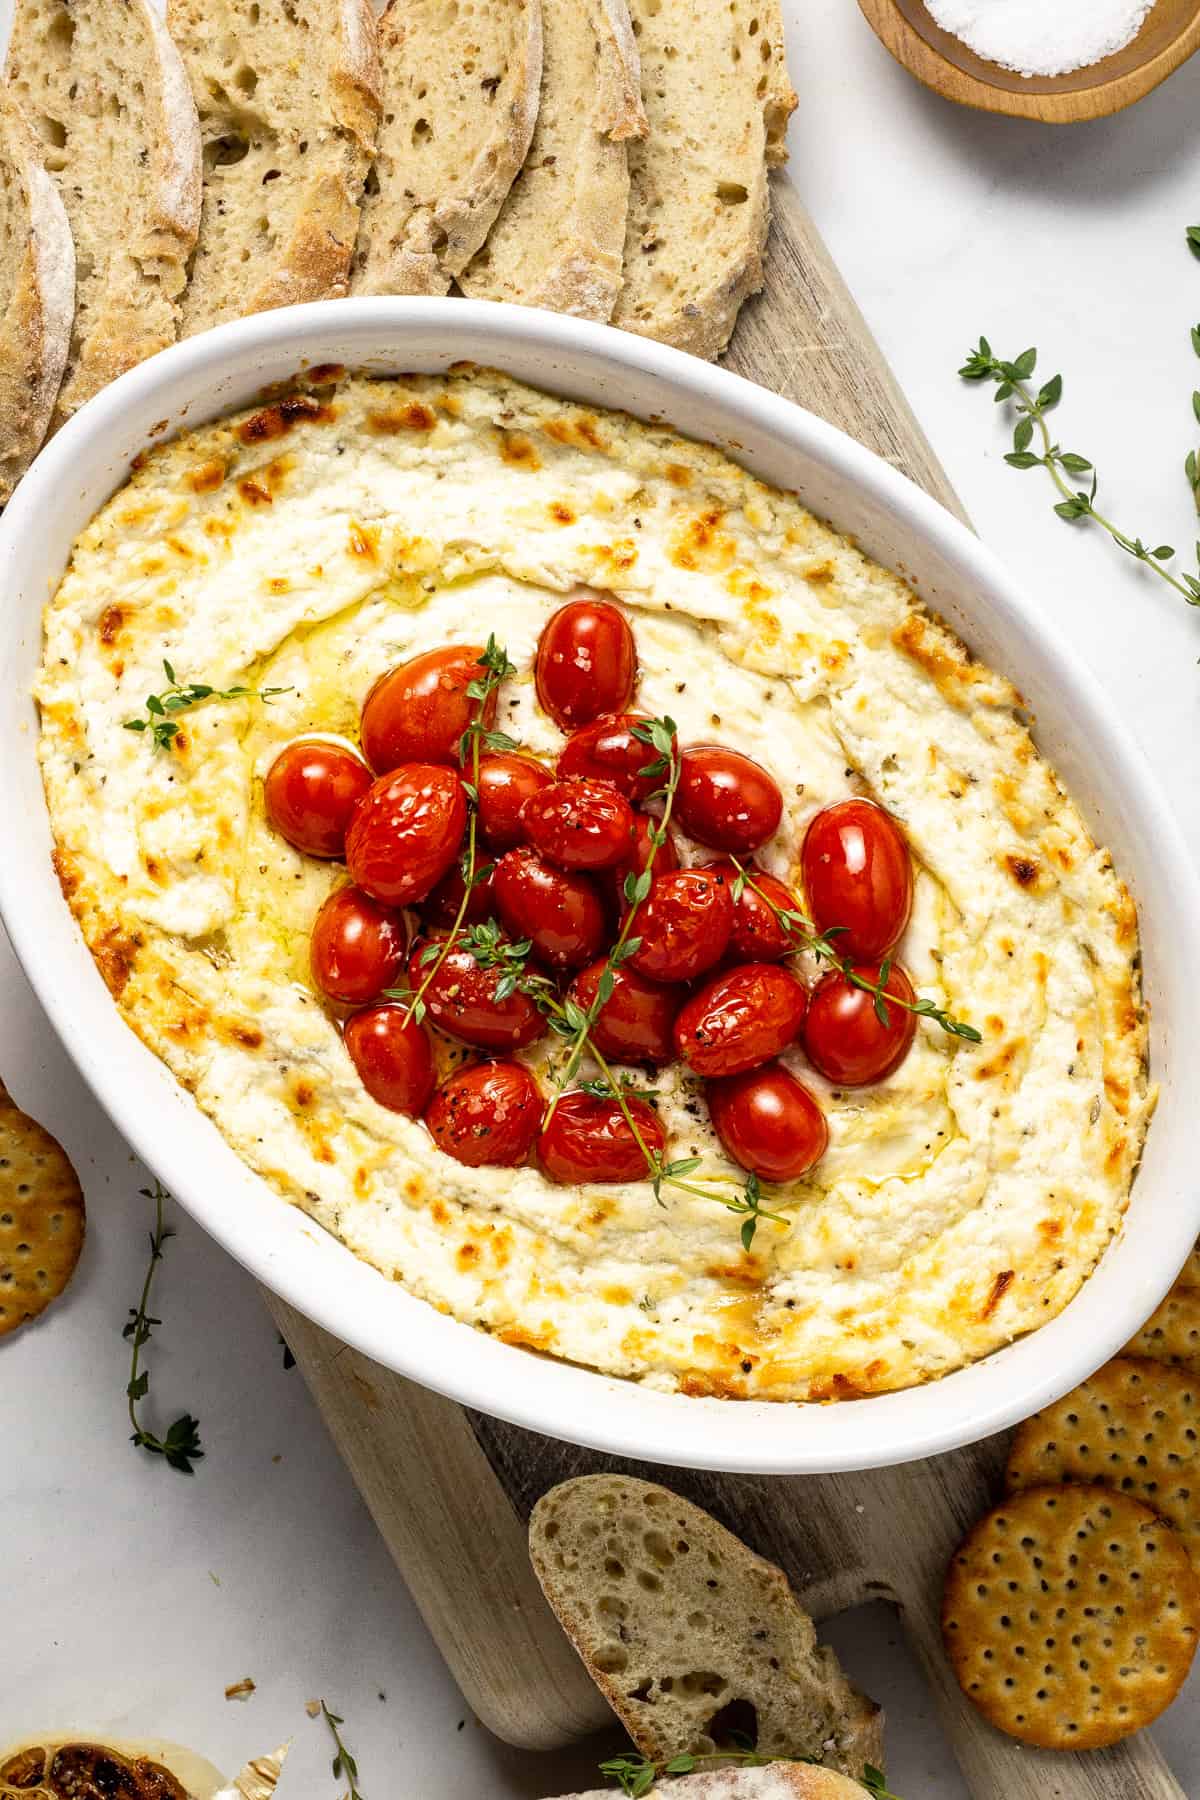 Overshot shot of baked goat cheese dip garnished with fresh thyme.